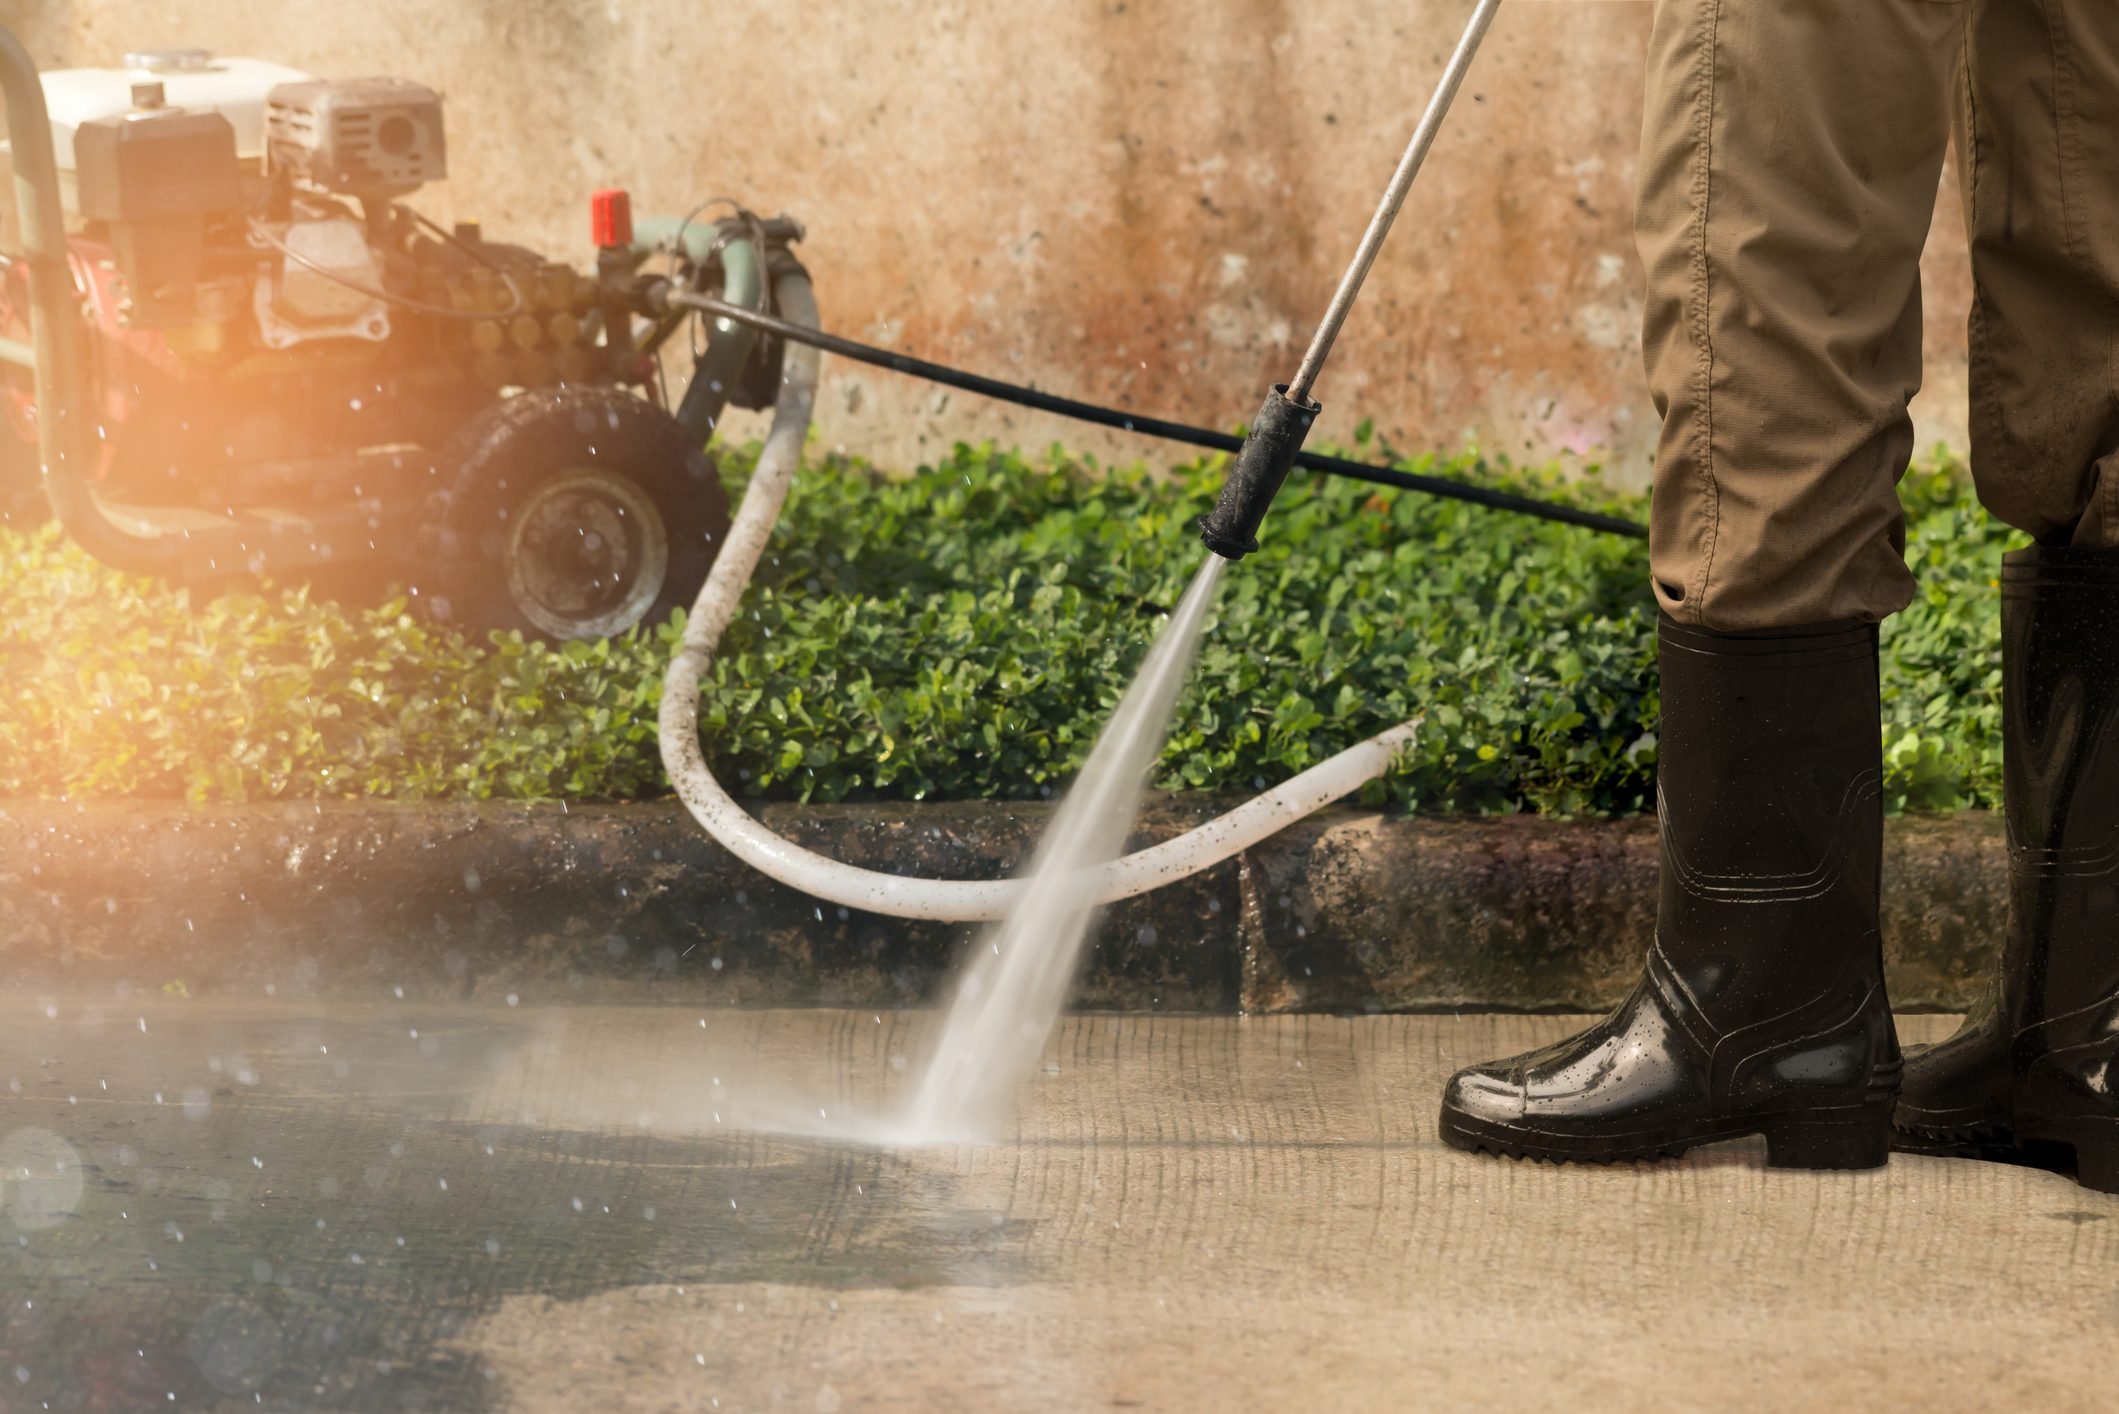 How To Start a Pressure Washer